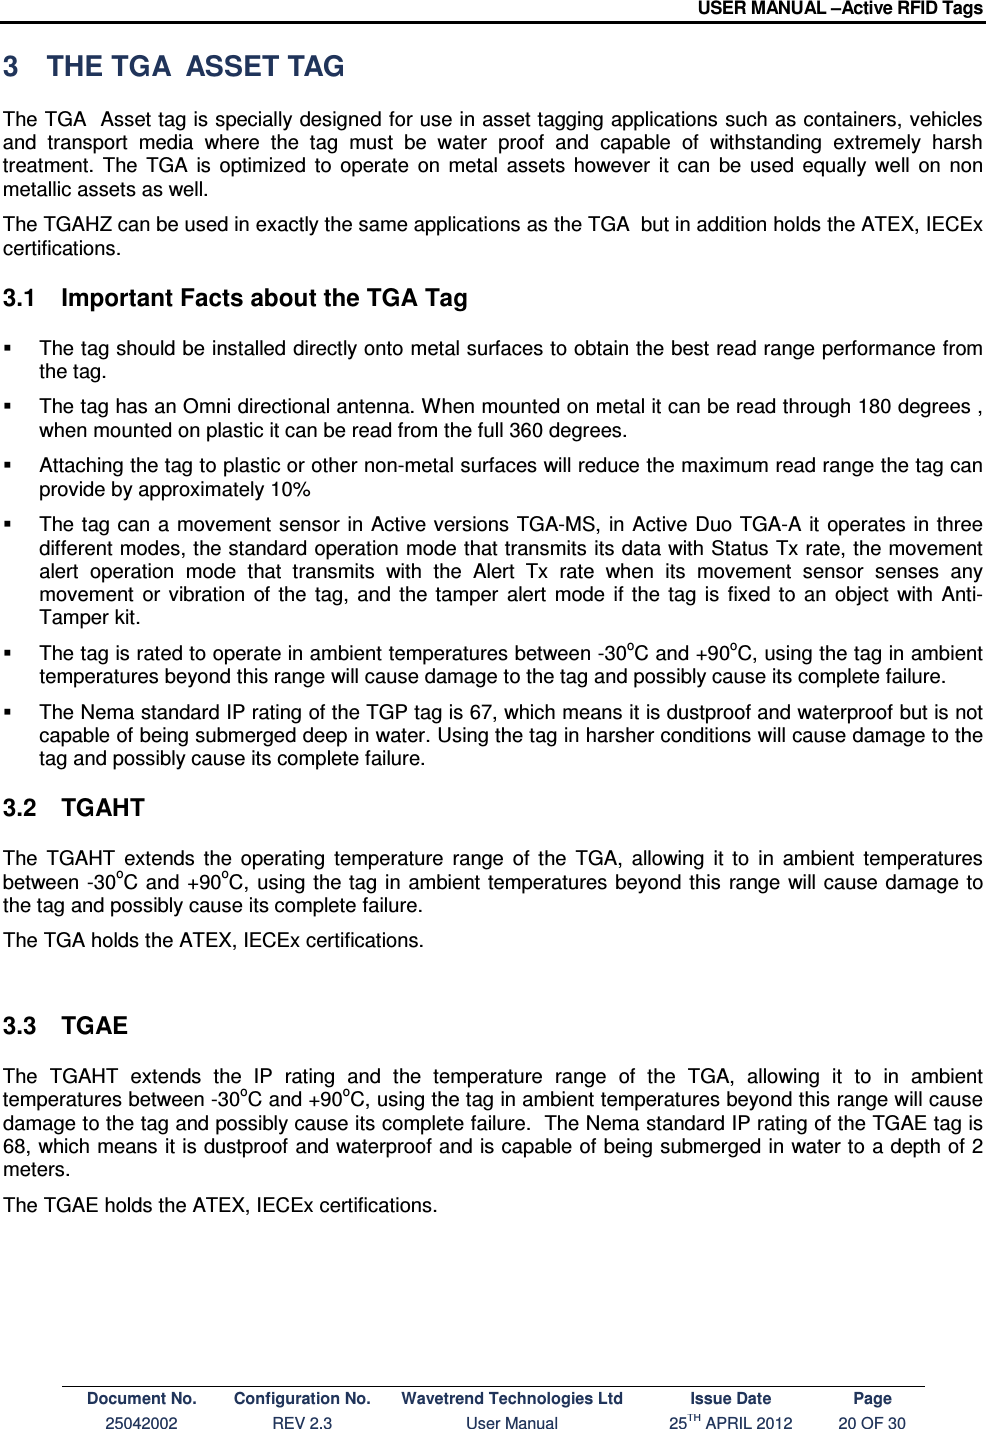 USER MANUAL –Active RFID Tags Document No. Configuration No. Wavetrend Technologies Ltd Issue Date Page 25042002  REV 2.3  User Manual  25TH APRIL 2012  20 OF 30  3  THE TGA  ASSET TAG The TGA  Asset tag is specially designed for use in asset tagging applications such as containers, vehicles and  transport  media  where  the  tag  must  be  water  proof  and  capable  of  withstanding  extremely  harsh treatment.  The  TGA  is  optimized  to  operate  on  metal  assets  however  it  can  be  used  equally  well  on  non metallic assets as well.  The TGAHZ can be used in exactly the same applications as the TGA  but in addition holds the ATEX, IECEx certifications.    3.1  Important Facts about the TGA Tag   The tag should be installed directly onto metal surfaces to obtain the best read range performance from the tag.    The tag has an Omni directional antenna. When mounted on metal it can be read through 180 degrees , when mounted on plastic it can be read from the full 360 degrees.   Attaching the tag to plastic or other non-metal surfaces will reduce the maximum read range the tag can provide by approximately 10%   The tag can  a  movement sensor  in  Active versions TGA-MS,  in Active Duo TGA-A it operates in three different modes, the standard operation mode that transmits its data with Status Tx rate, the movement alert  operation  mode  that  transmits  with  the  Alert  Tx  rate  when  its  movement  sensor  senses  any movement  or  vibration  of  the  tag,  and  the  tamper  alert  mode  if  the  tag  is  fixed  to  an  object  with  Anti-Tamper kit.   The tag is rated to operate in ambient temperatures between -30oC and +90oC, using the tag in ambient temperatures beyond this range will cause damage to the tag and possibly cause its complete failure.   The Nema standard IP rating of the TGP tag is 67, which means it is dustproof and waterproof but is not capable of being submerged deep in water. Using the tag in harsher conditions will cause damage to the tag and possibly cause its complete failure. 3.2  TGAHT  The  TGAHT  extends  the  operating  temperature  range  of  the  TGA,  allowing  it  to  in  ambient  temperatures between -30oC and  +90oC, using the tag  in  ambient temperatures beyond this  range will cause damage to the tag and possibly cause its complete failure.  The TGA holds the ATEX, IECEx certifications.     3.3  TGAE The  TGAHT  extends  the  IP  rating  and  the  temperature  range  of  the  TGA,  allowing  it  to  in  ambient temperatures between -30oC and +90oC, using the tag in ambient temperatures beyond this range will cause damage to the tag and possibly cause its complete failure.  The Nema standard IP rating of the TGAE tag is 68, which means it is dustproof and waterproof and is capable of being submerged in water to a depth of 2 meters.  The TGAE holds the ATEX, IECEx certifications.       